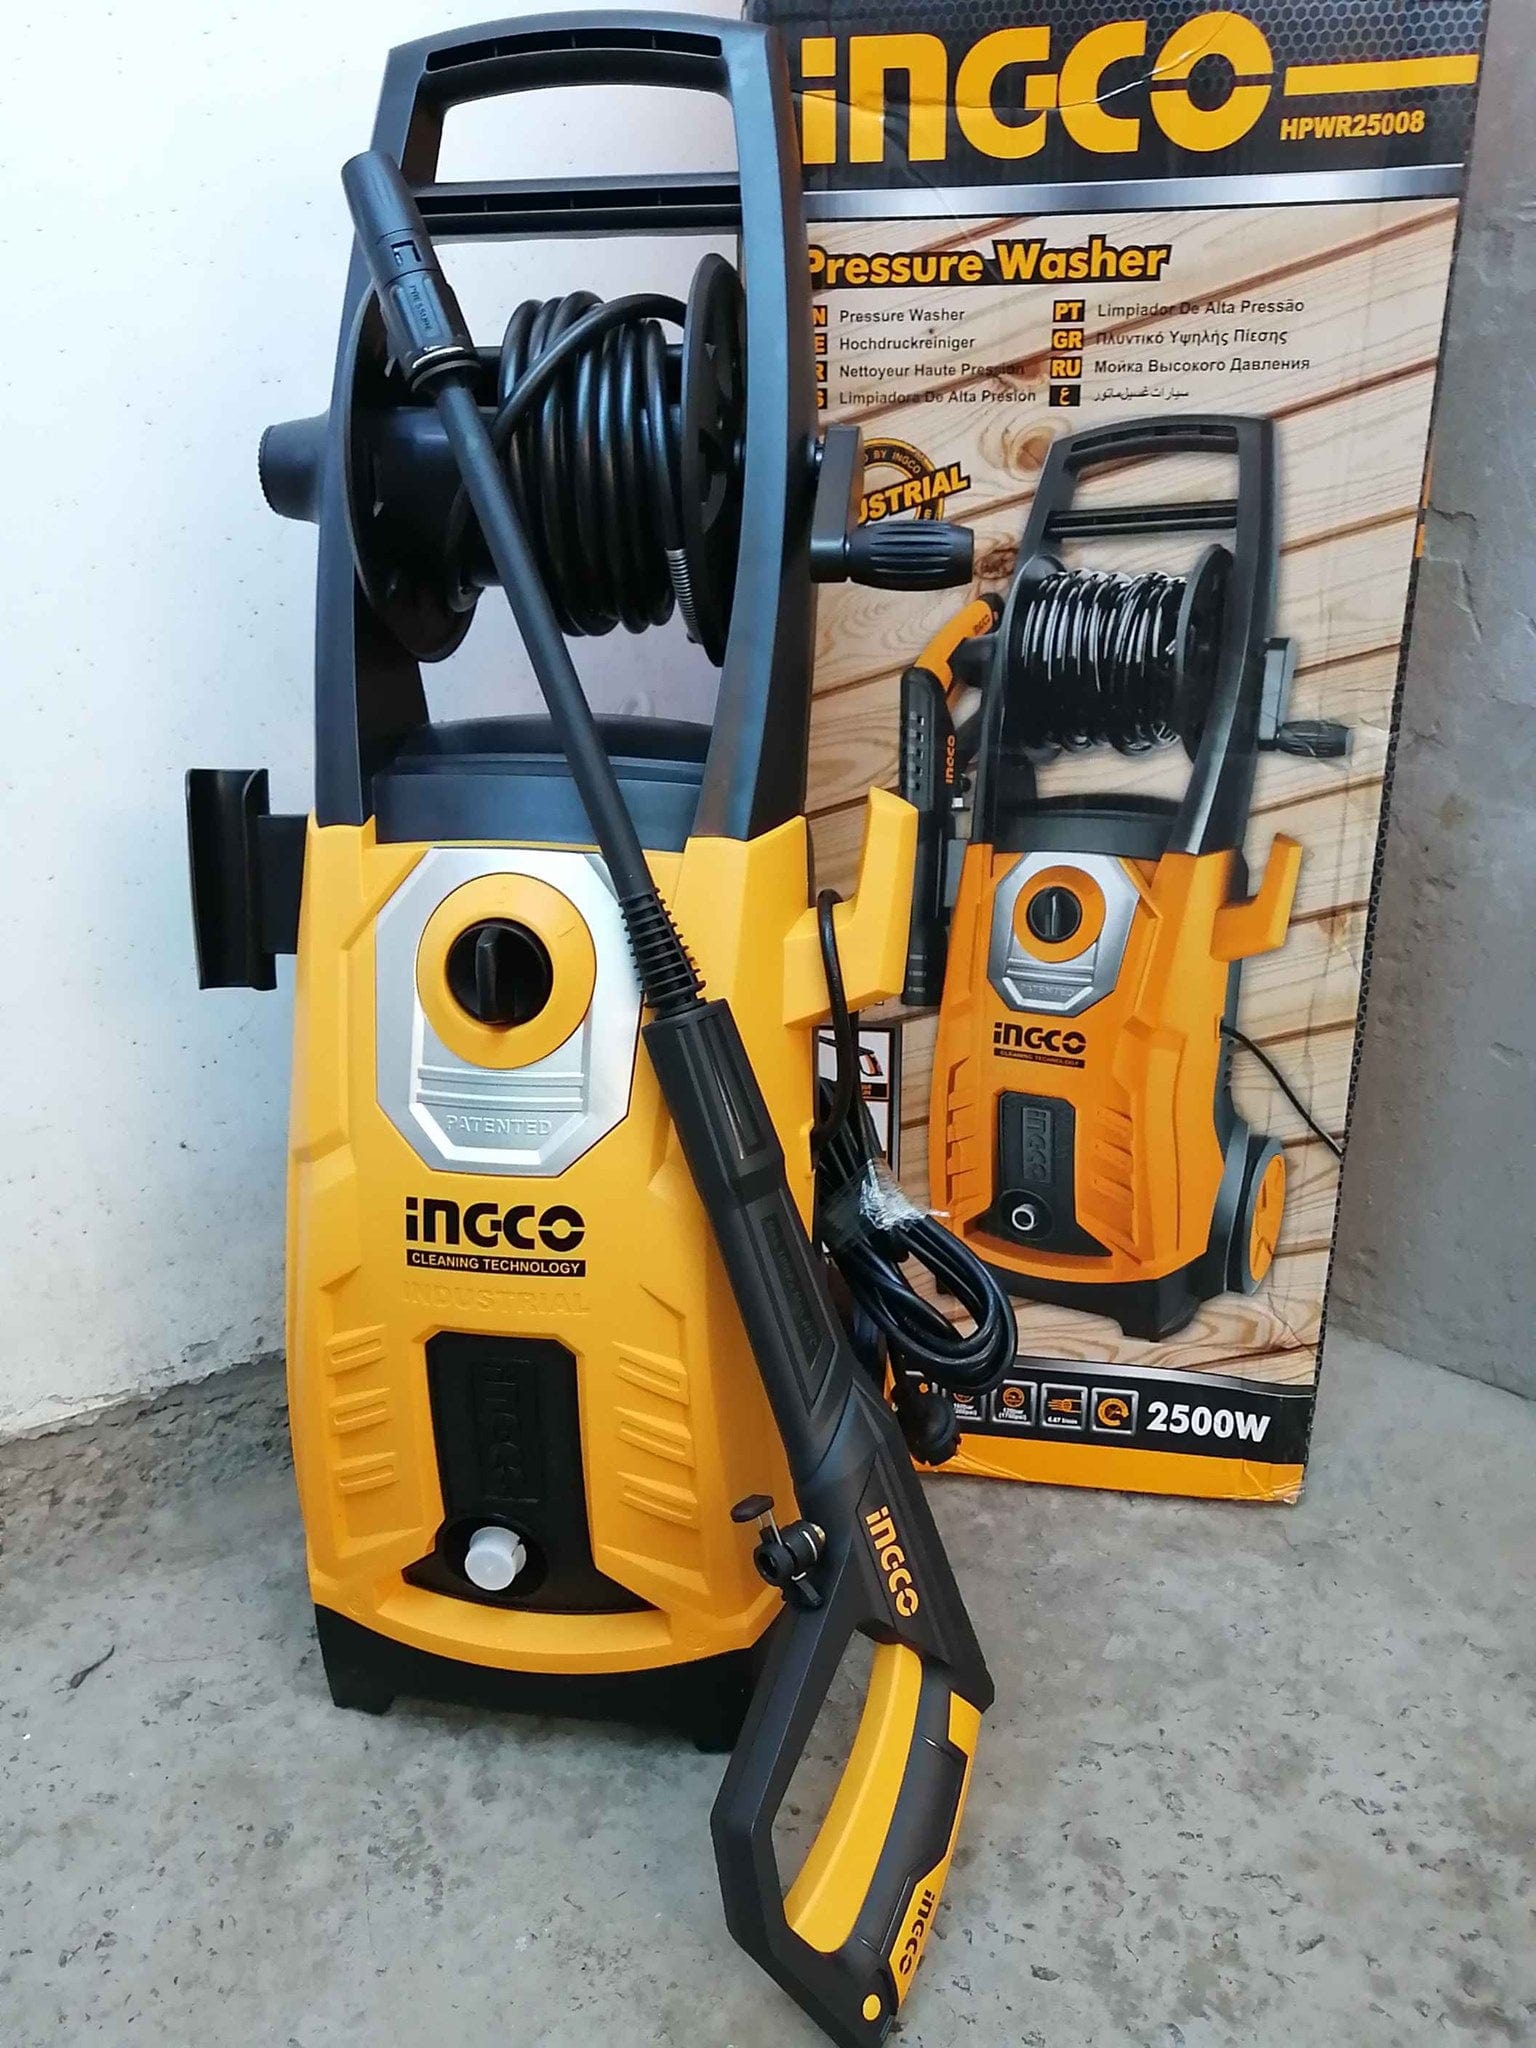 Ingco High Pressure Washer 2500W 160Bar - HPWR25008 | Supply Master | Accra, Ghana Pressure Washer Buy Tools hardware Building materials